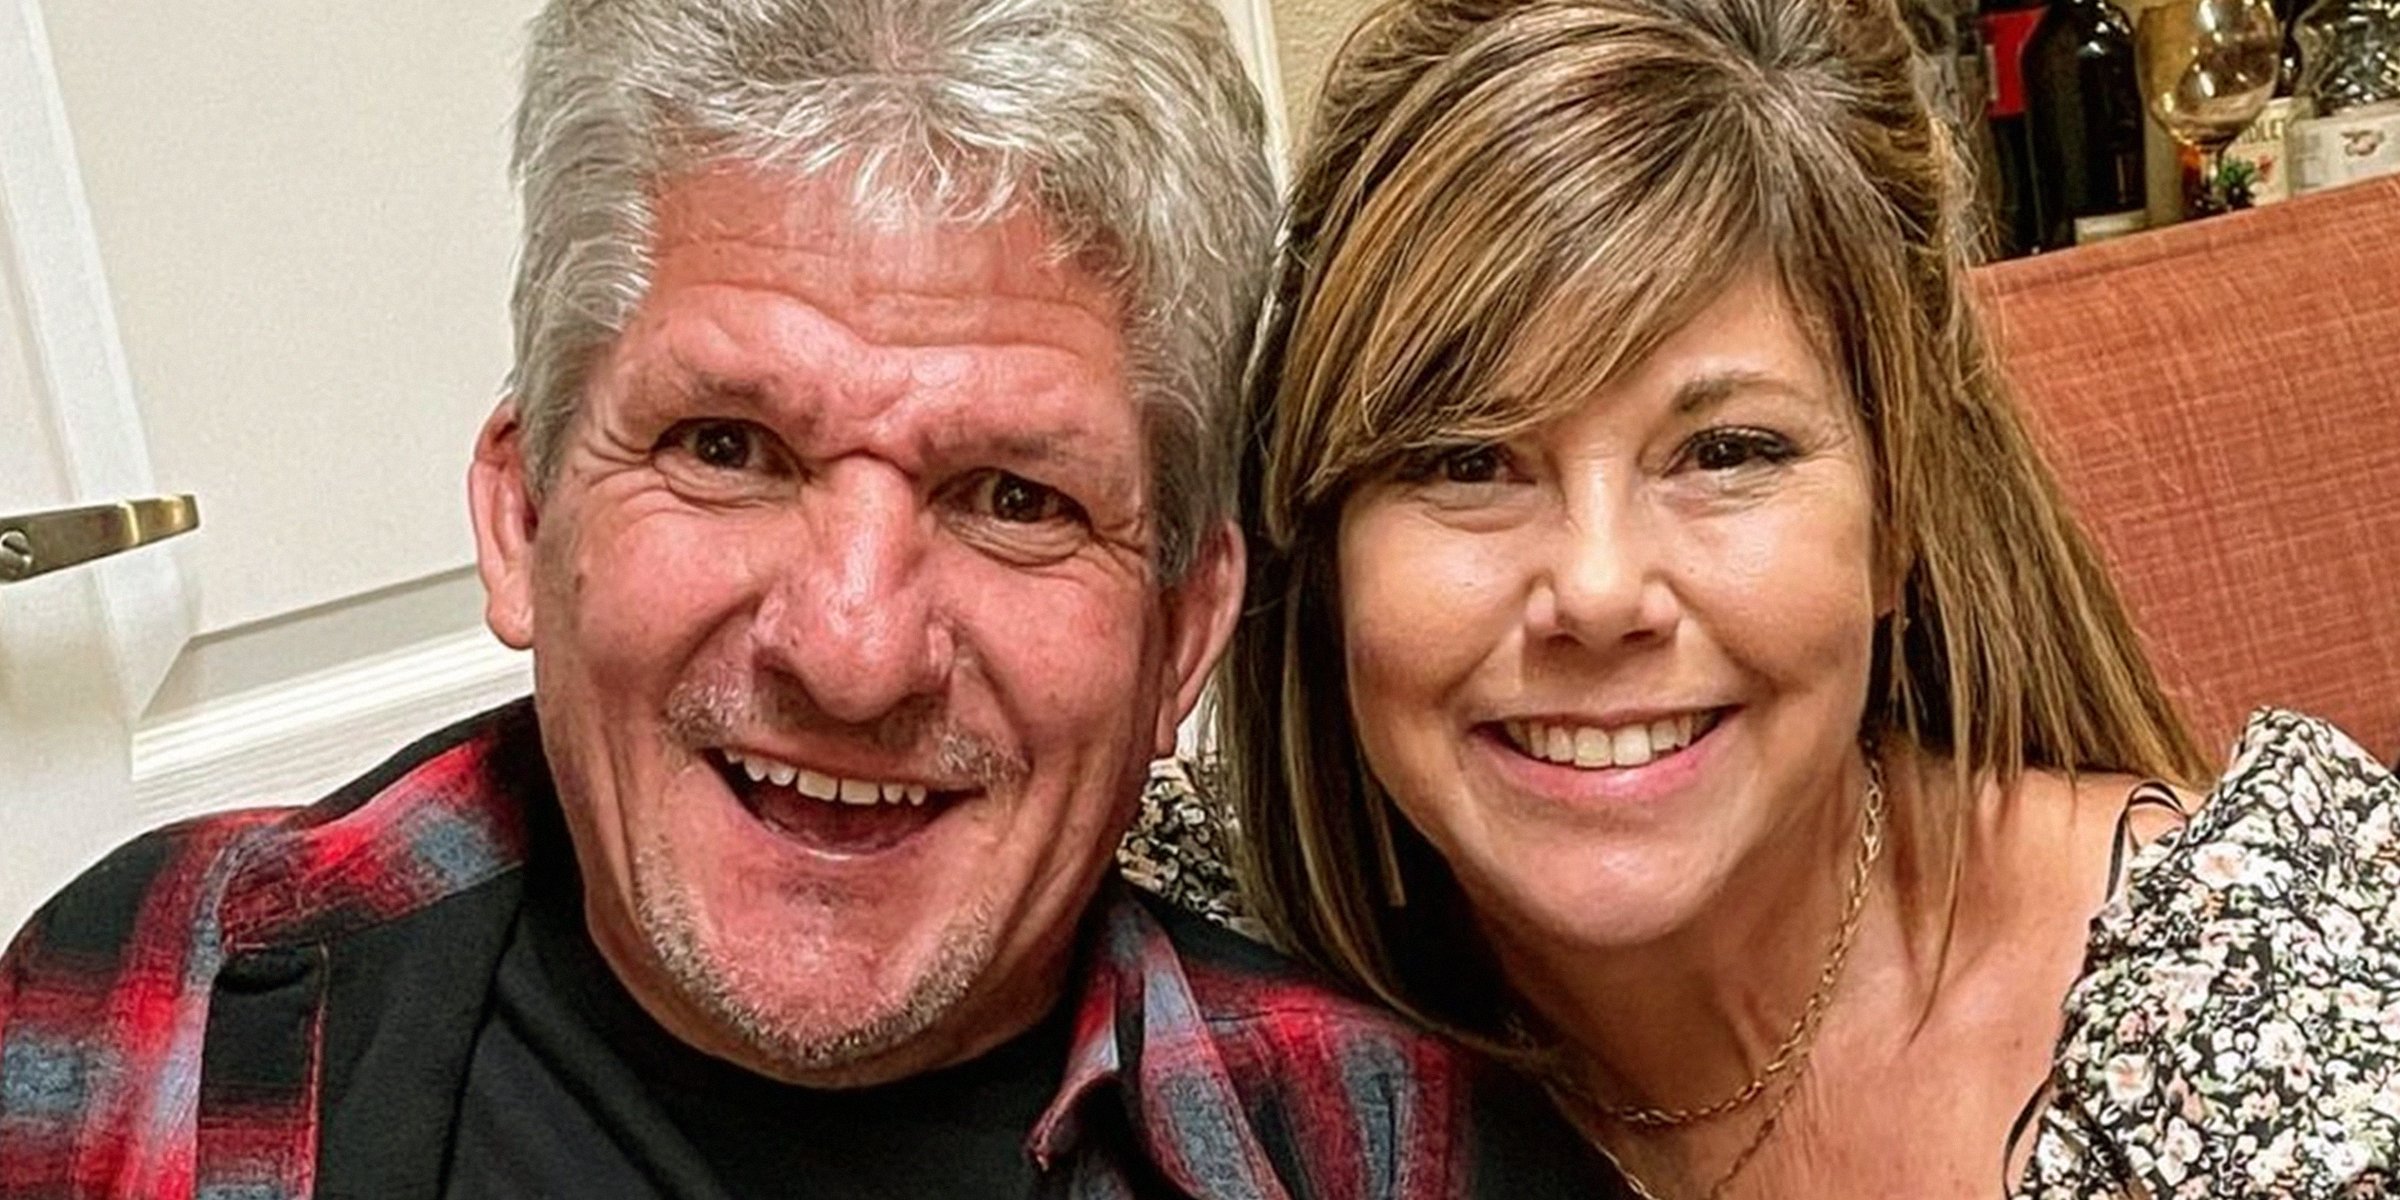 Why did Amy Roloff and Matt Divorce Each other After 27 Years of Marriage?